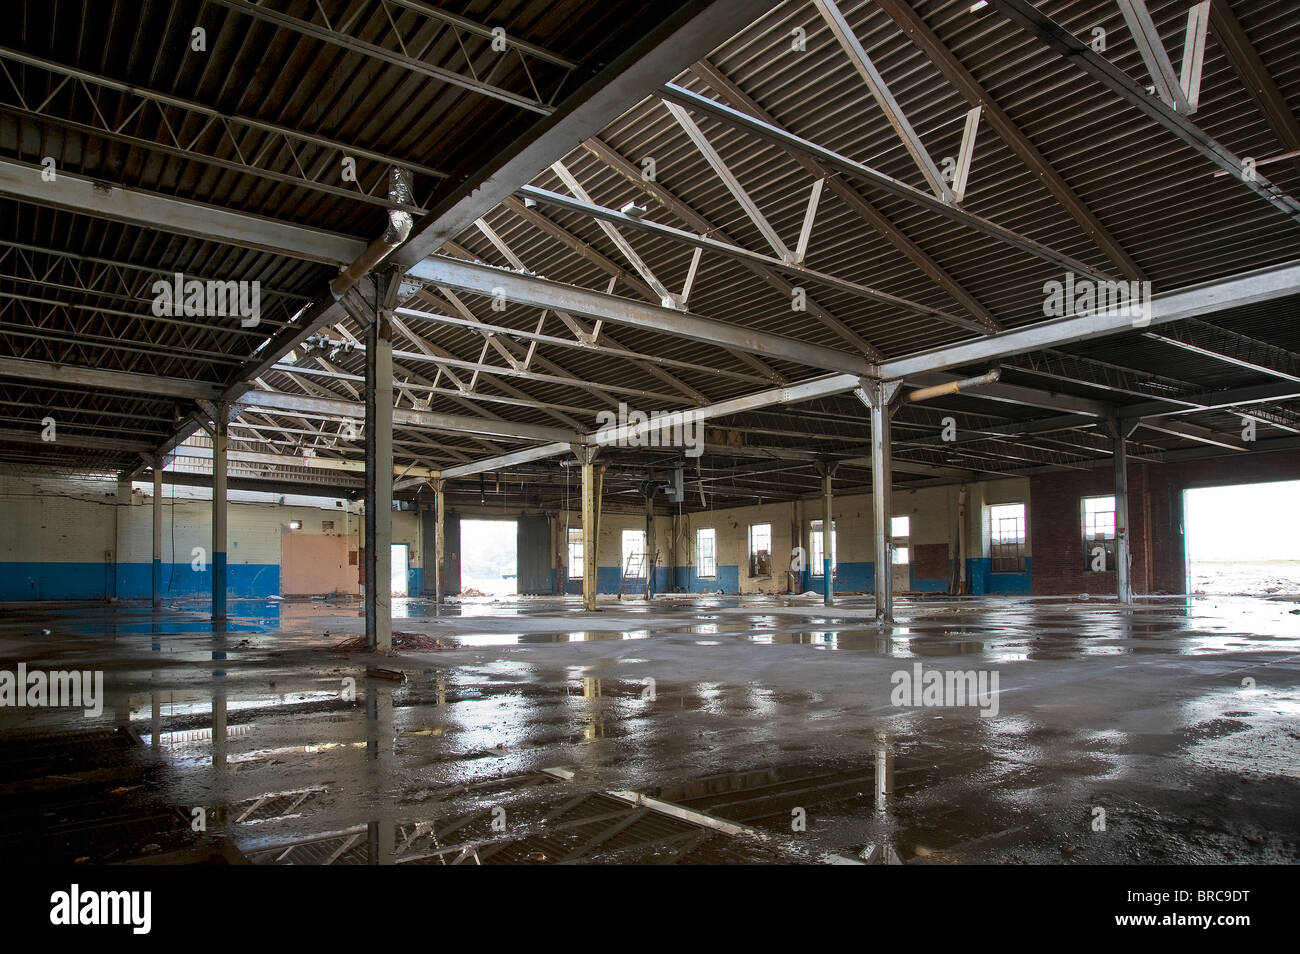 Abandoned Old Industrial Building With Puddles Of Water On Floor, Philadelphia, USA Stock Photo